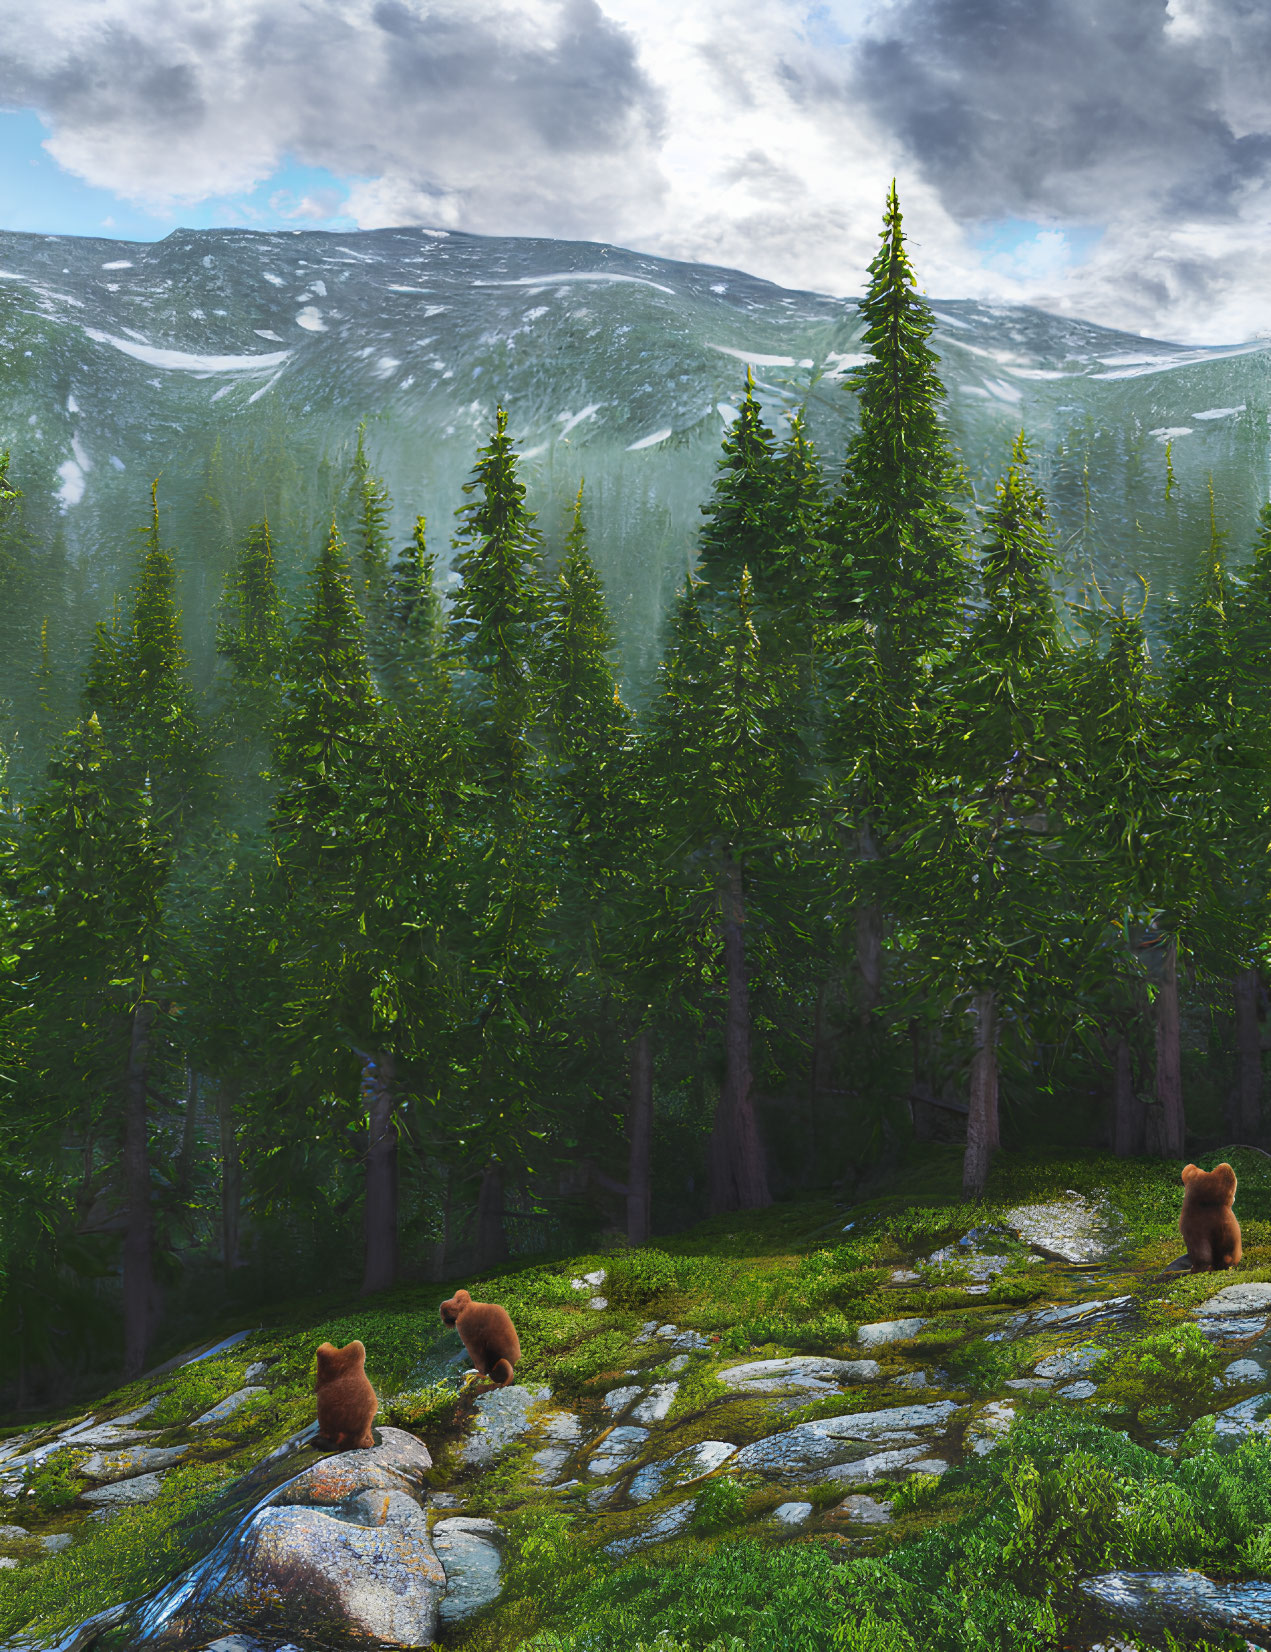 Three bears in a forest with tall pine trees and snow-capped mountains under a cloudy sky.